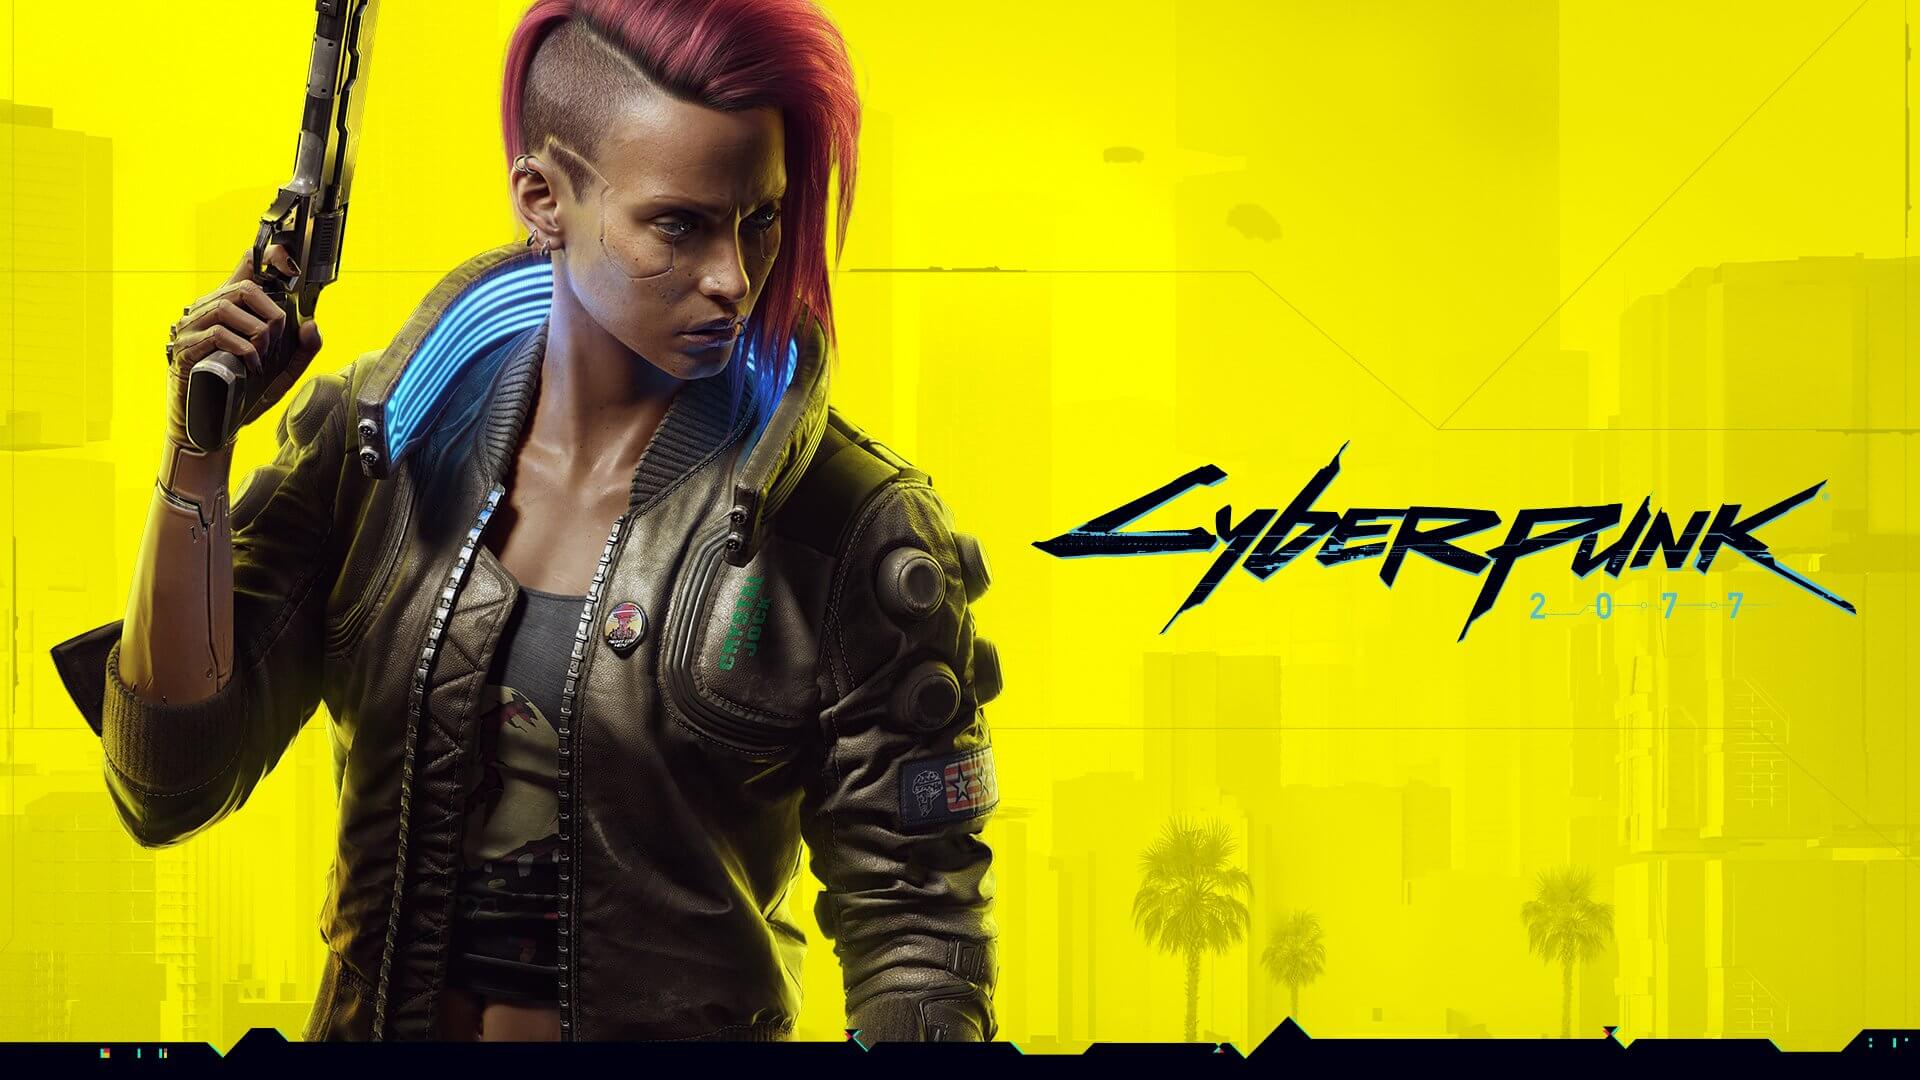 Cyberpunk 2077: PS5 and Xbox Series X/S Versions Are Out Now